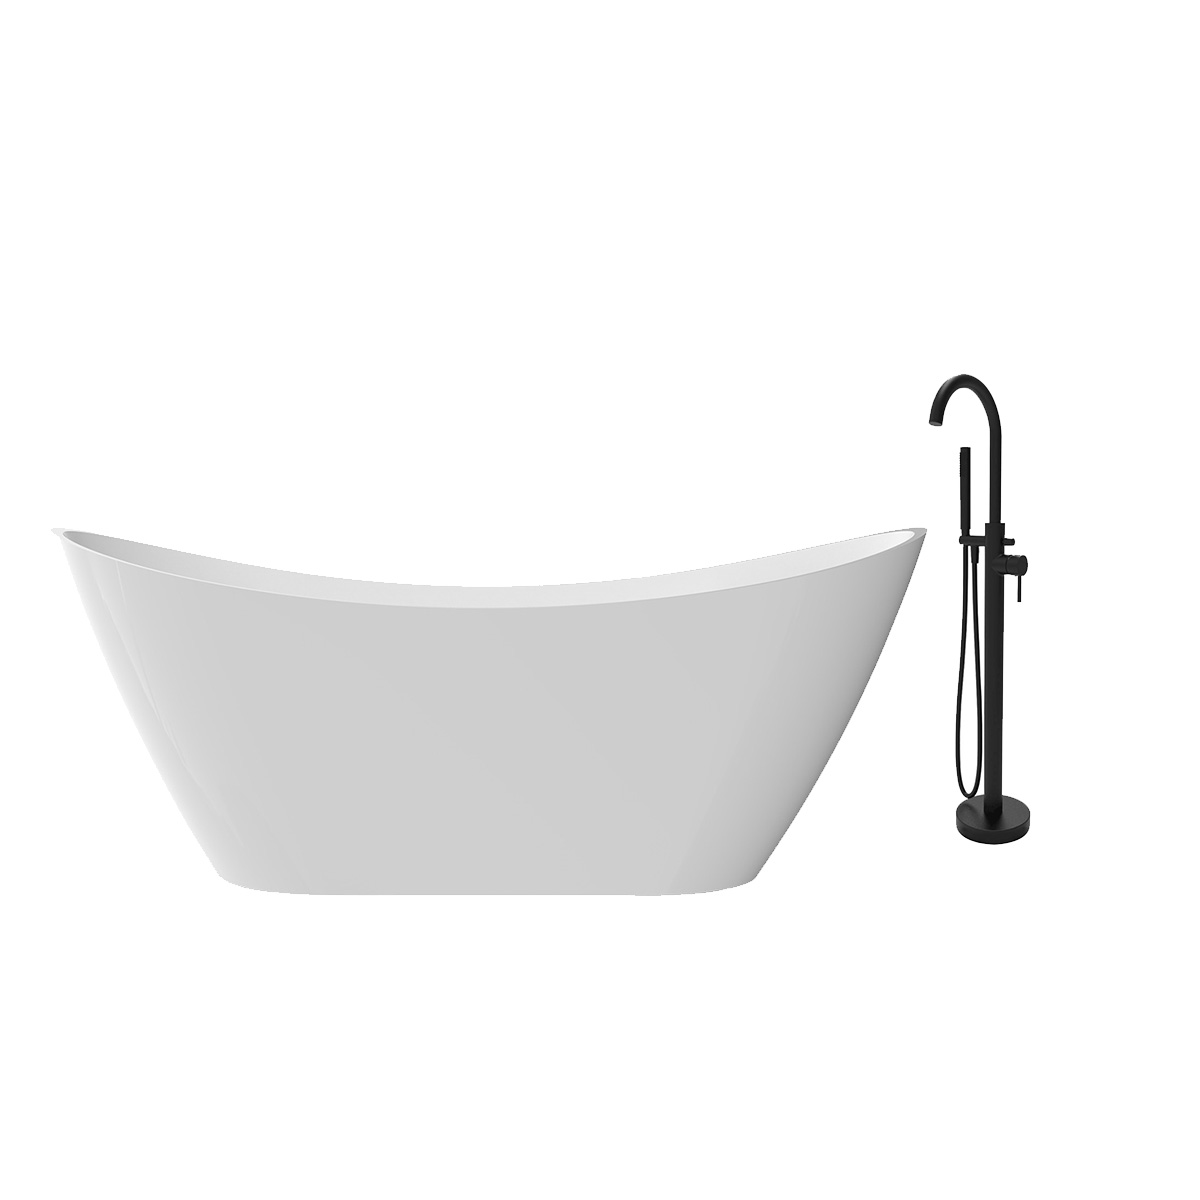 Arabica 1700mm Freestanding Double Ended Bath and Tap Deal (16295)